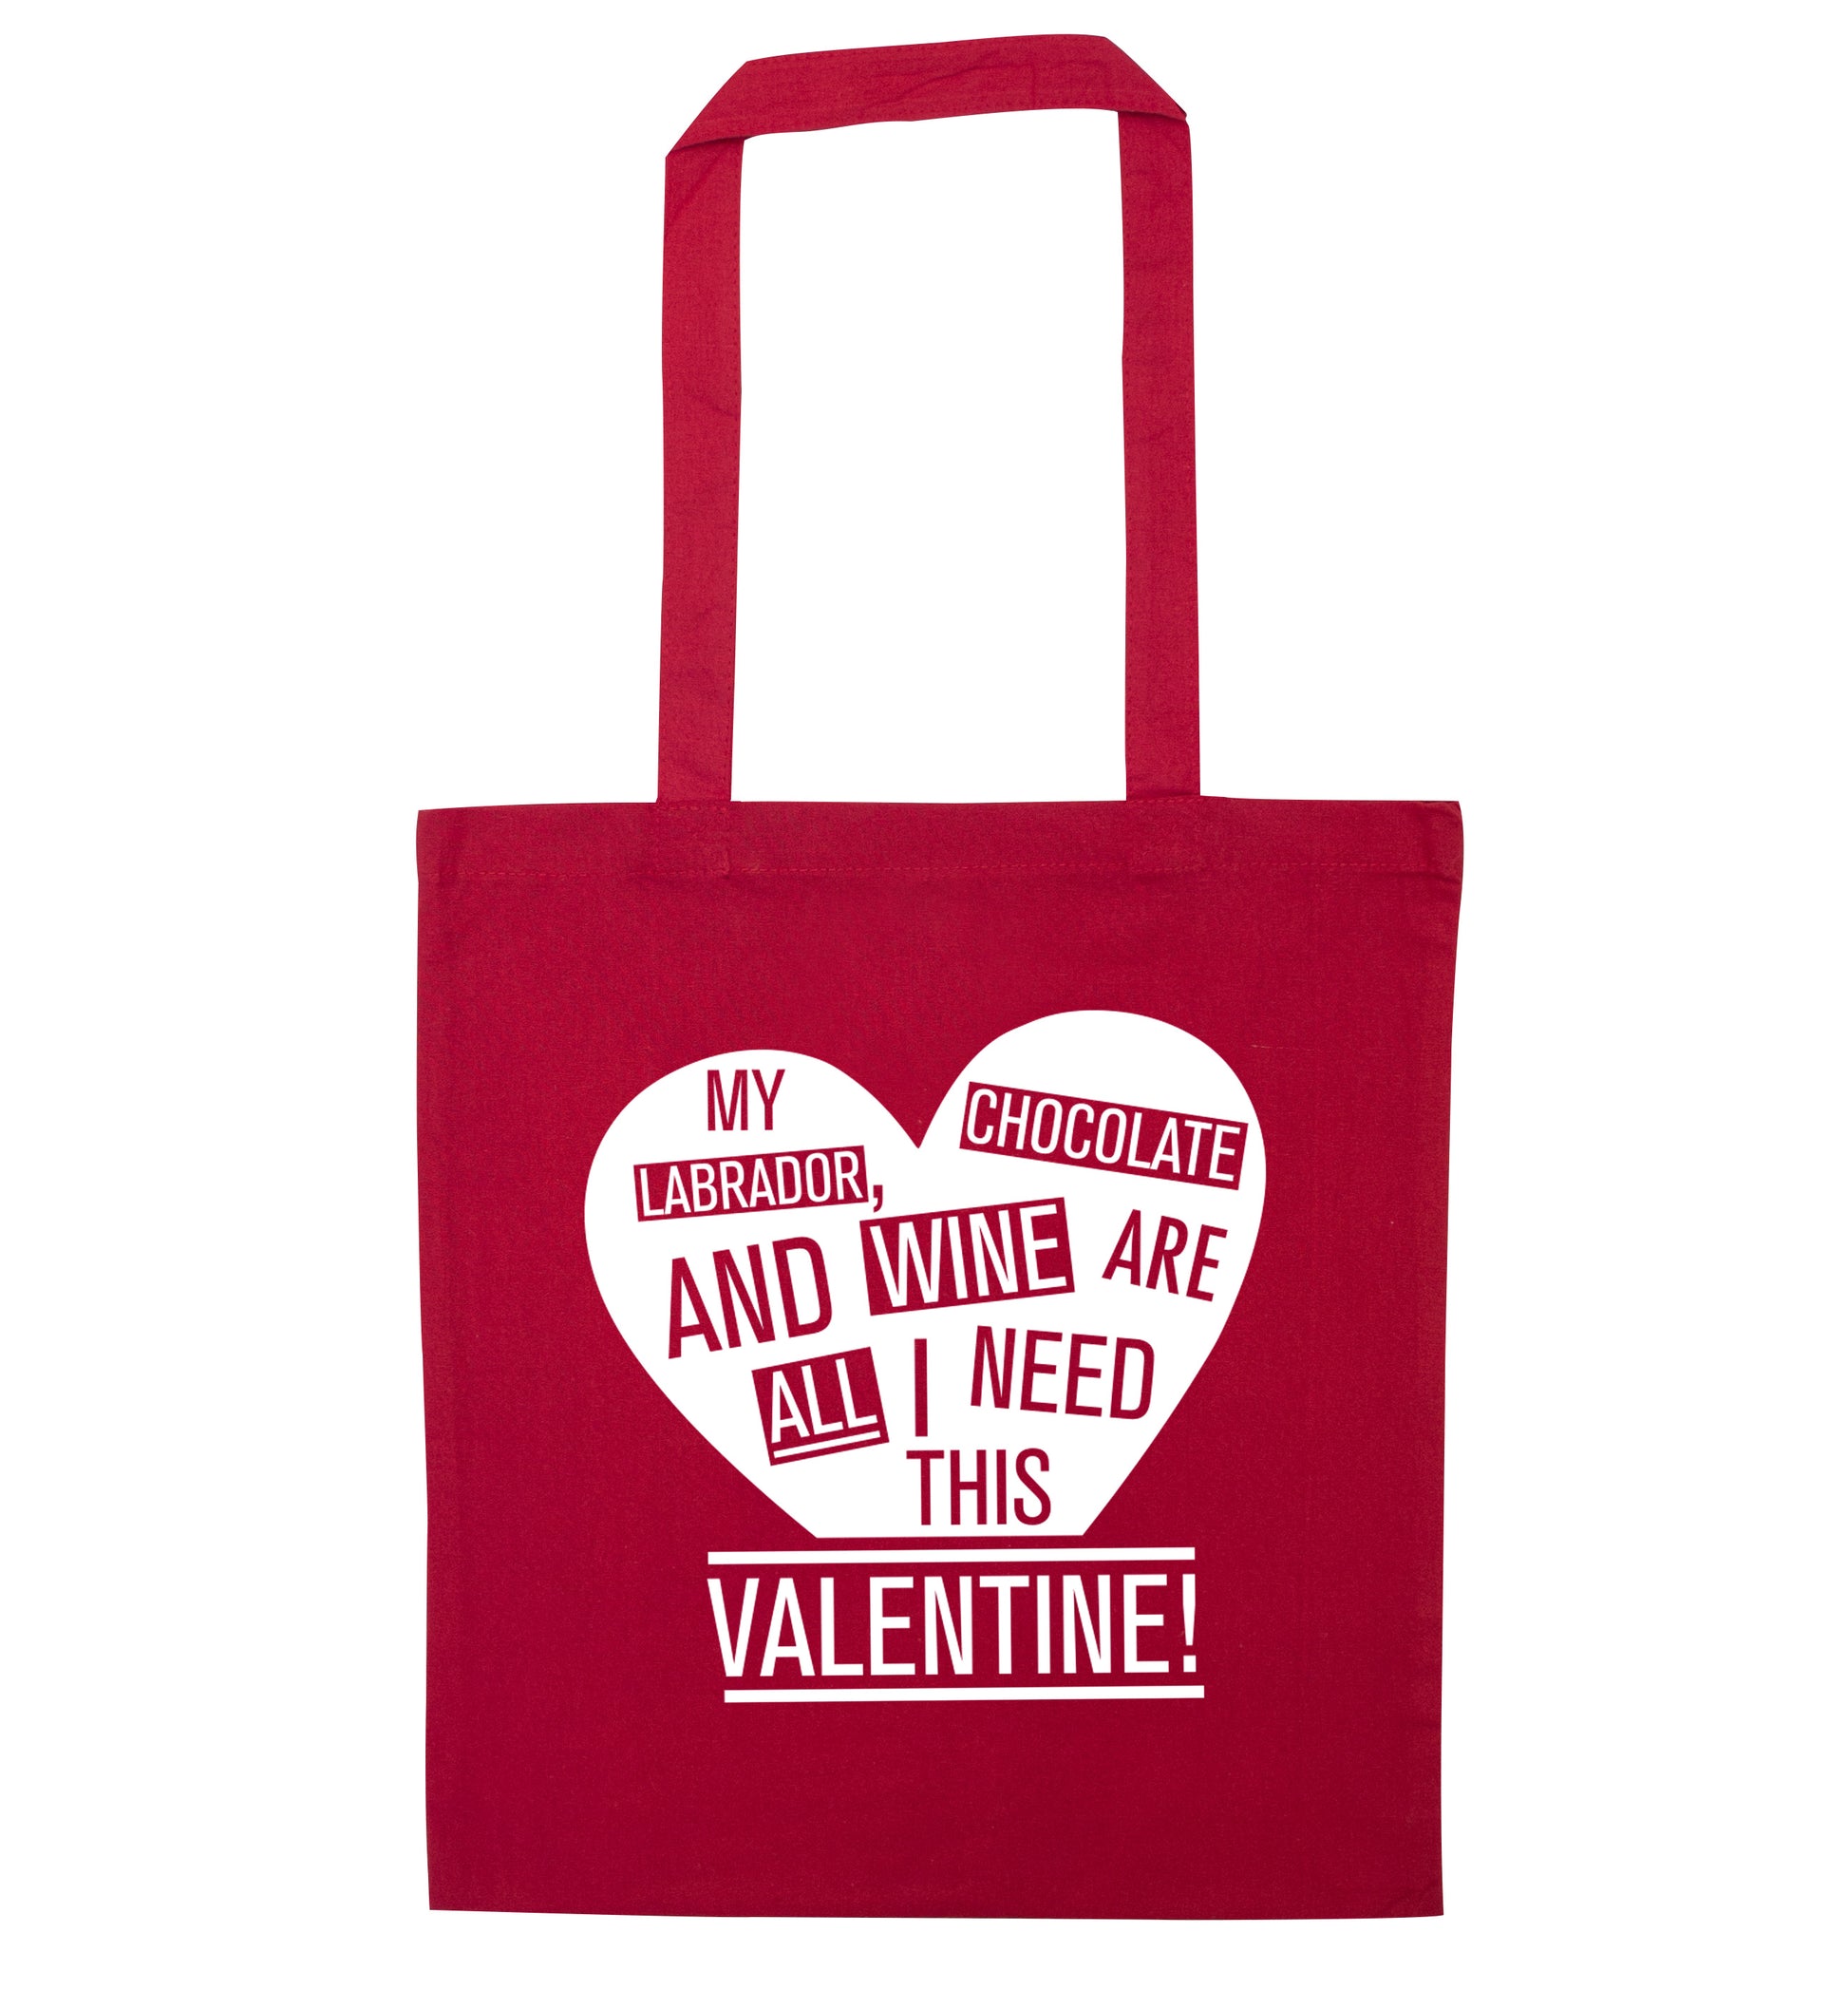 My labrador, chocolate and wine are all I need this valentine! red tote bag